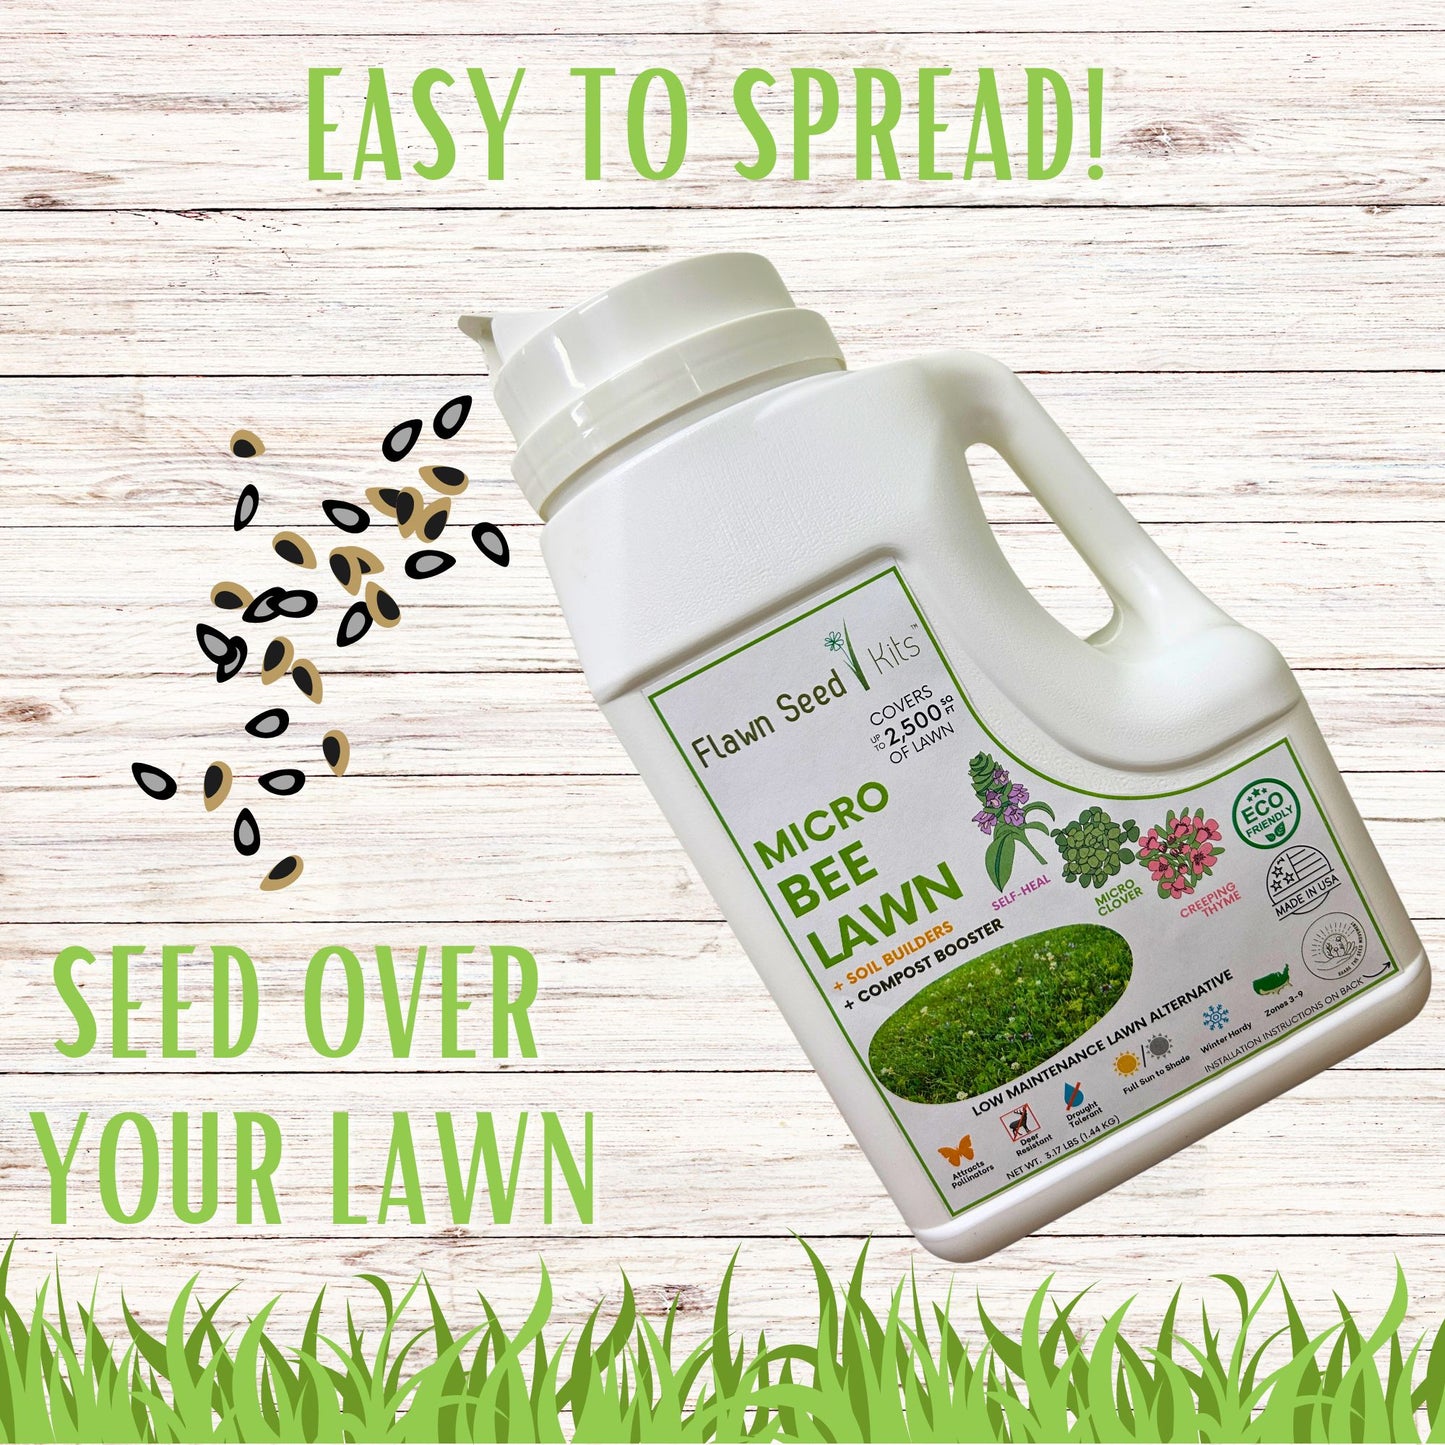 Easy to Spread Flawn Seed Kit Simple Seeding Process over your lawn, Mow to half inch, rake to loosen soil, shake to spread seed